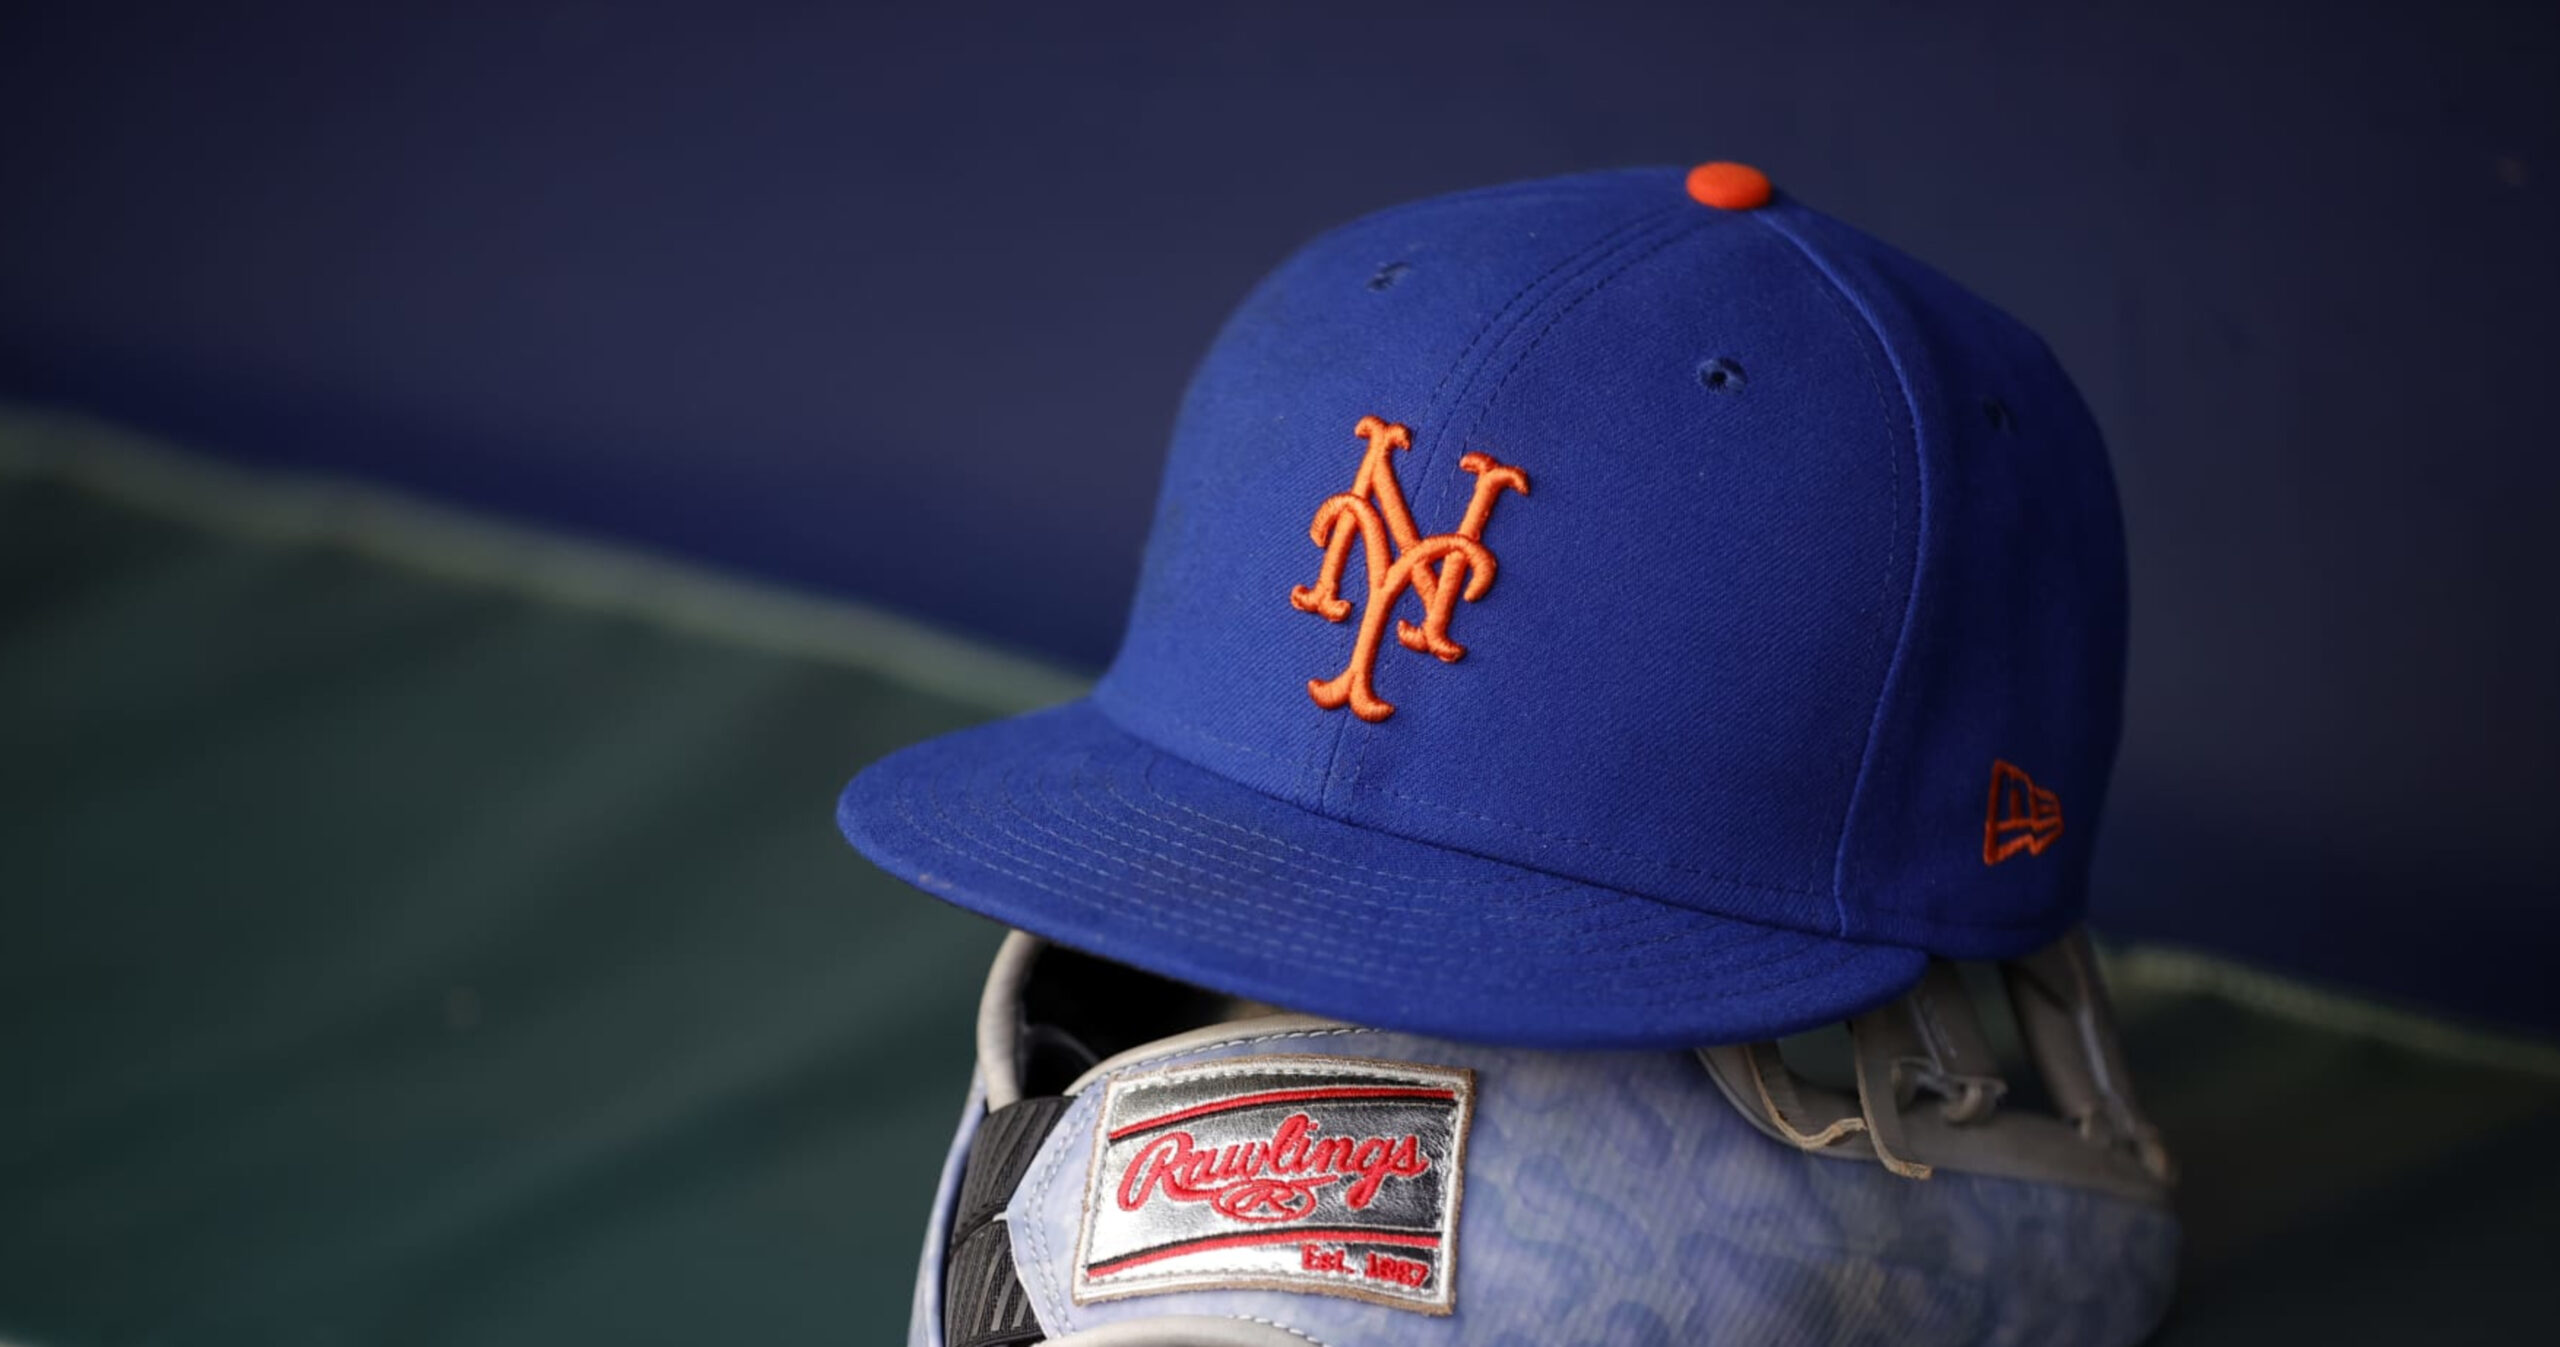 MLB Rumors: Mets, Vladi Miguel Guerrero Agree to Contract; Son of Hall of Famer Vlad